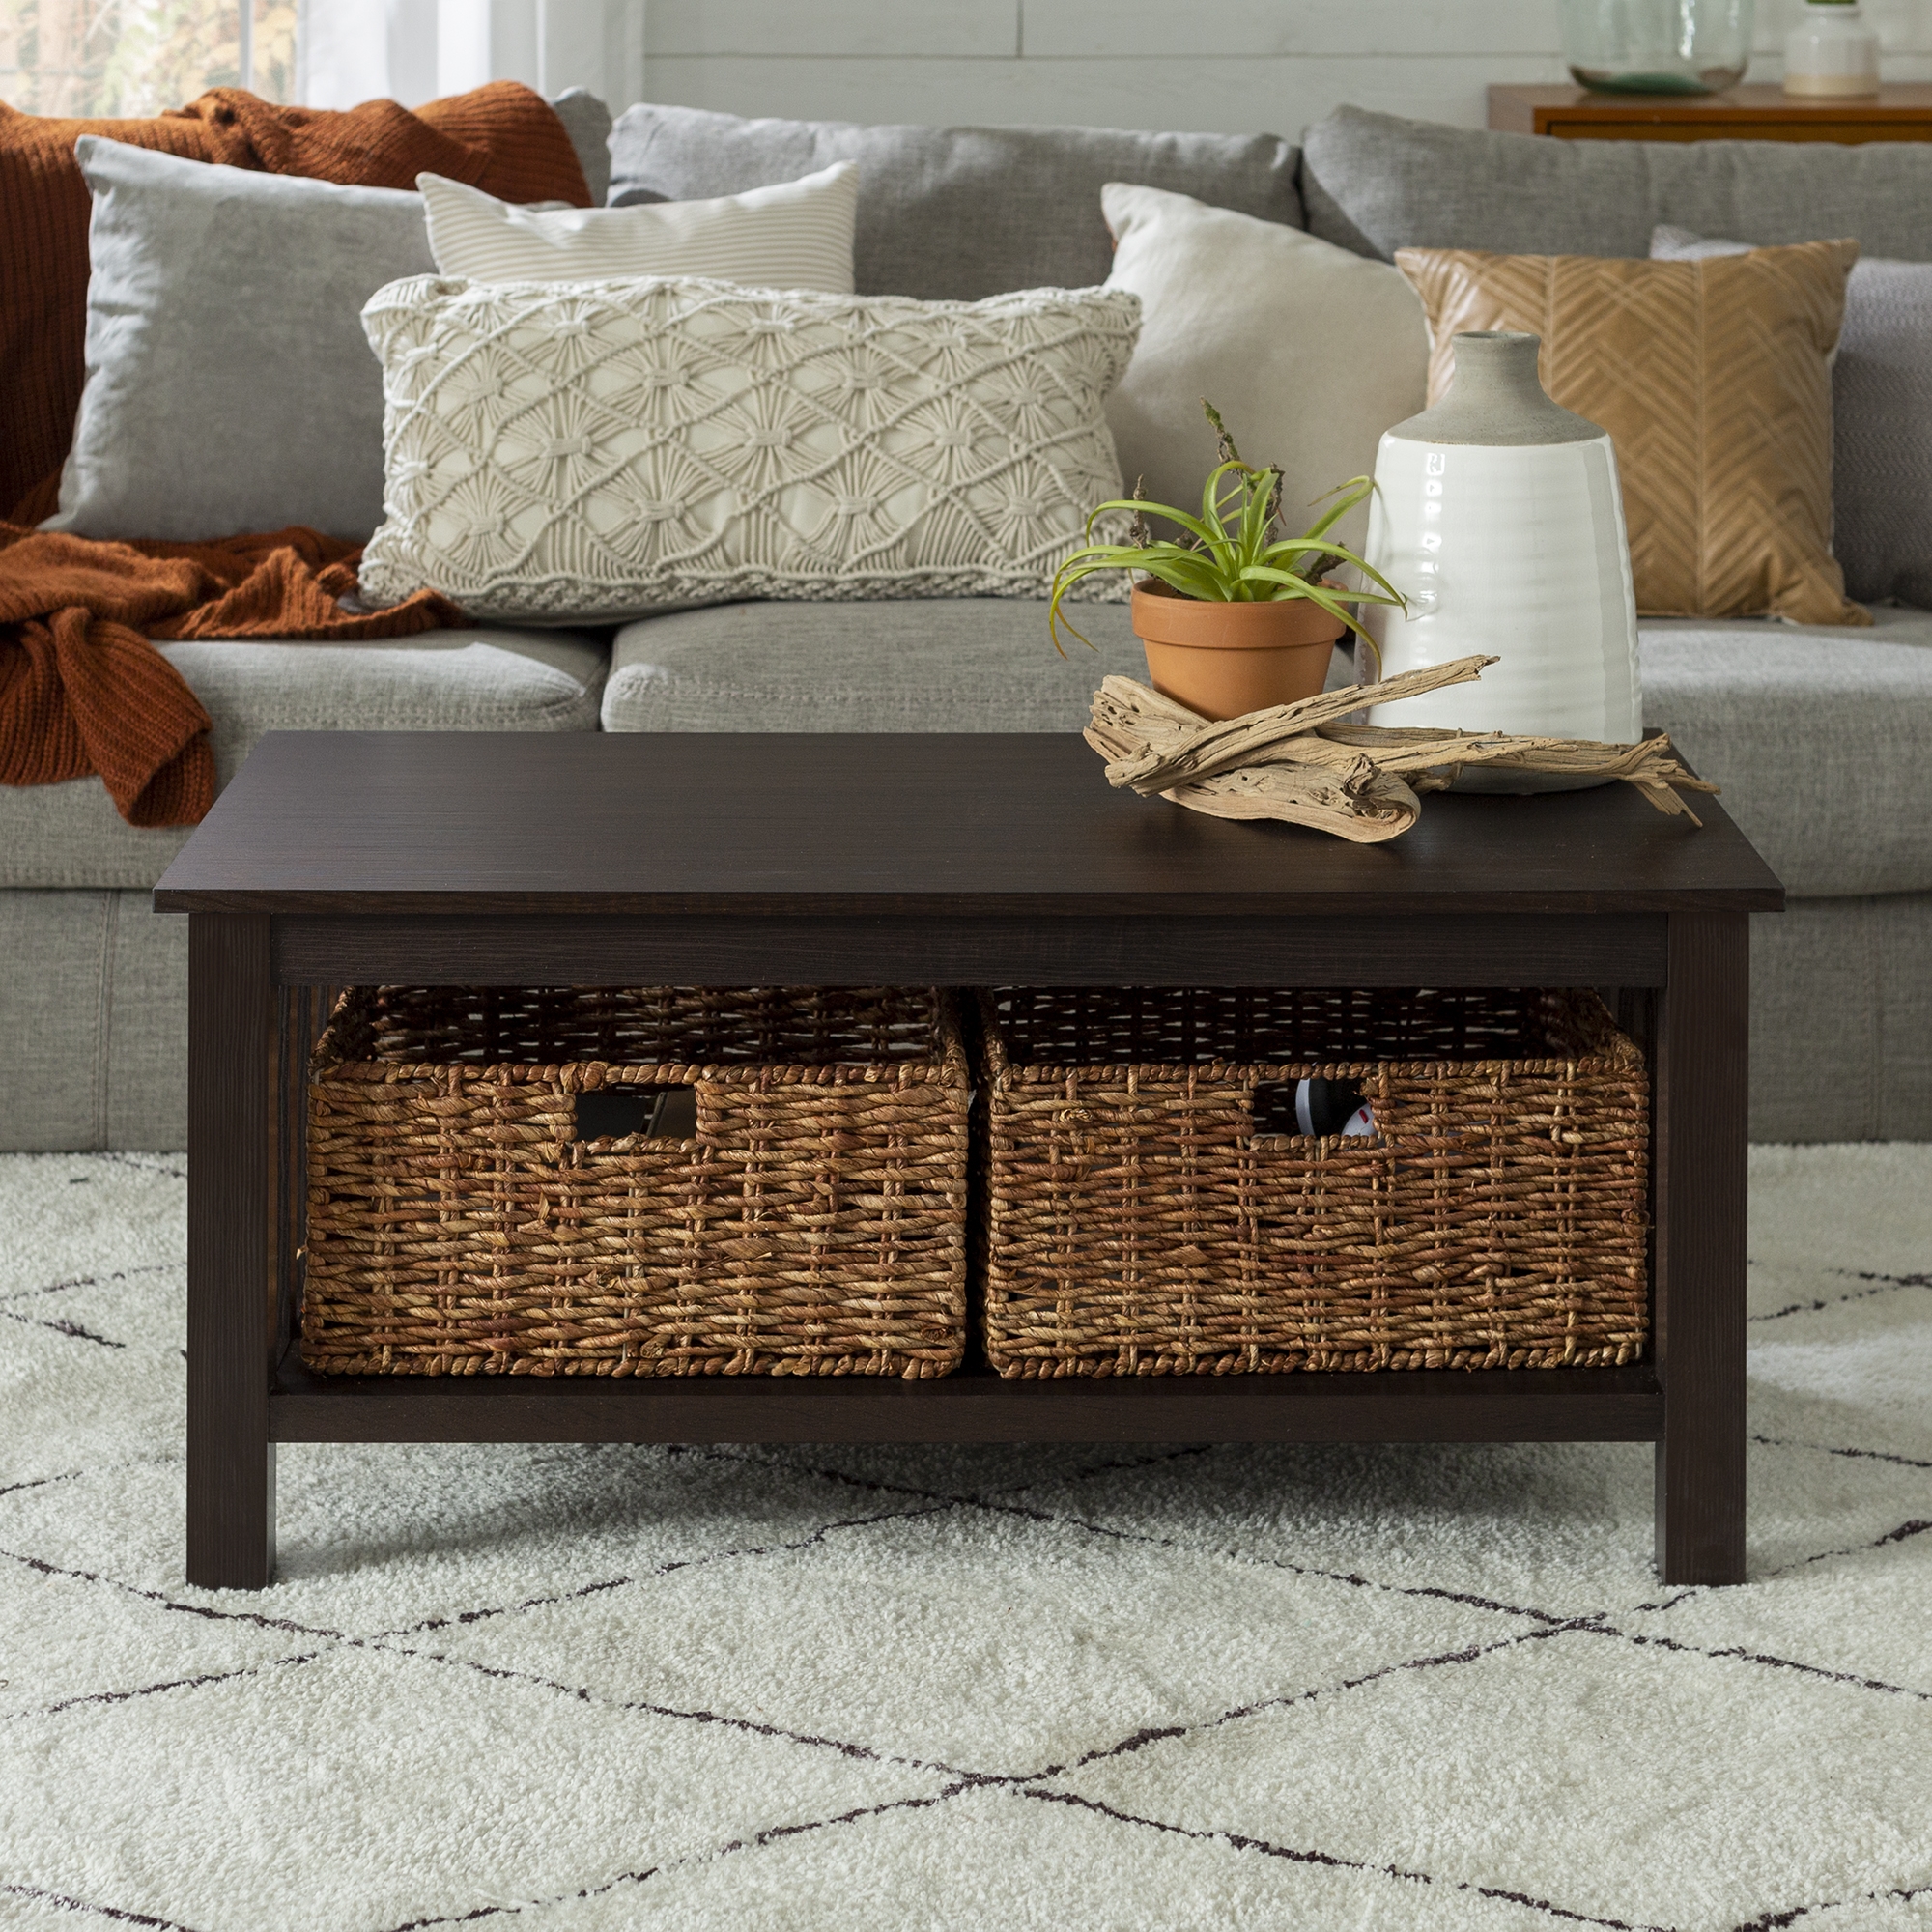 Mission Storage Coffee Table with Baskets - Espresso - Image 5